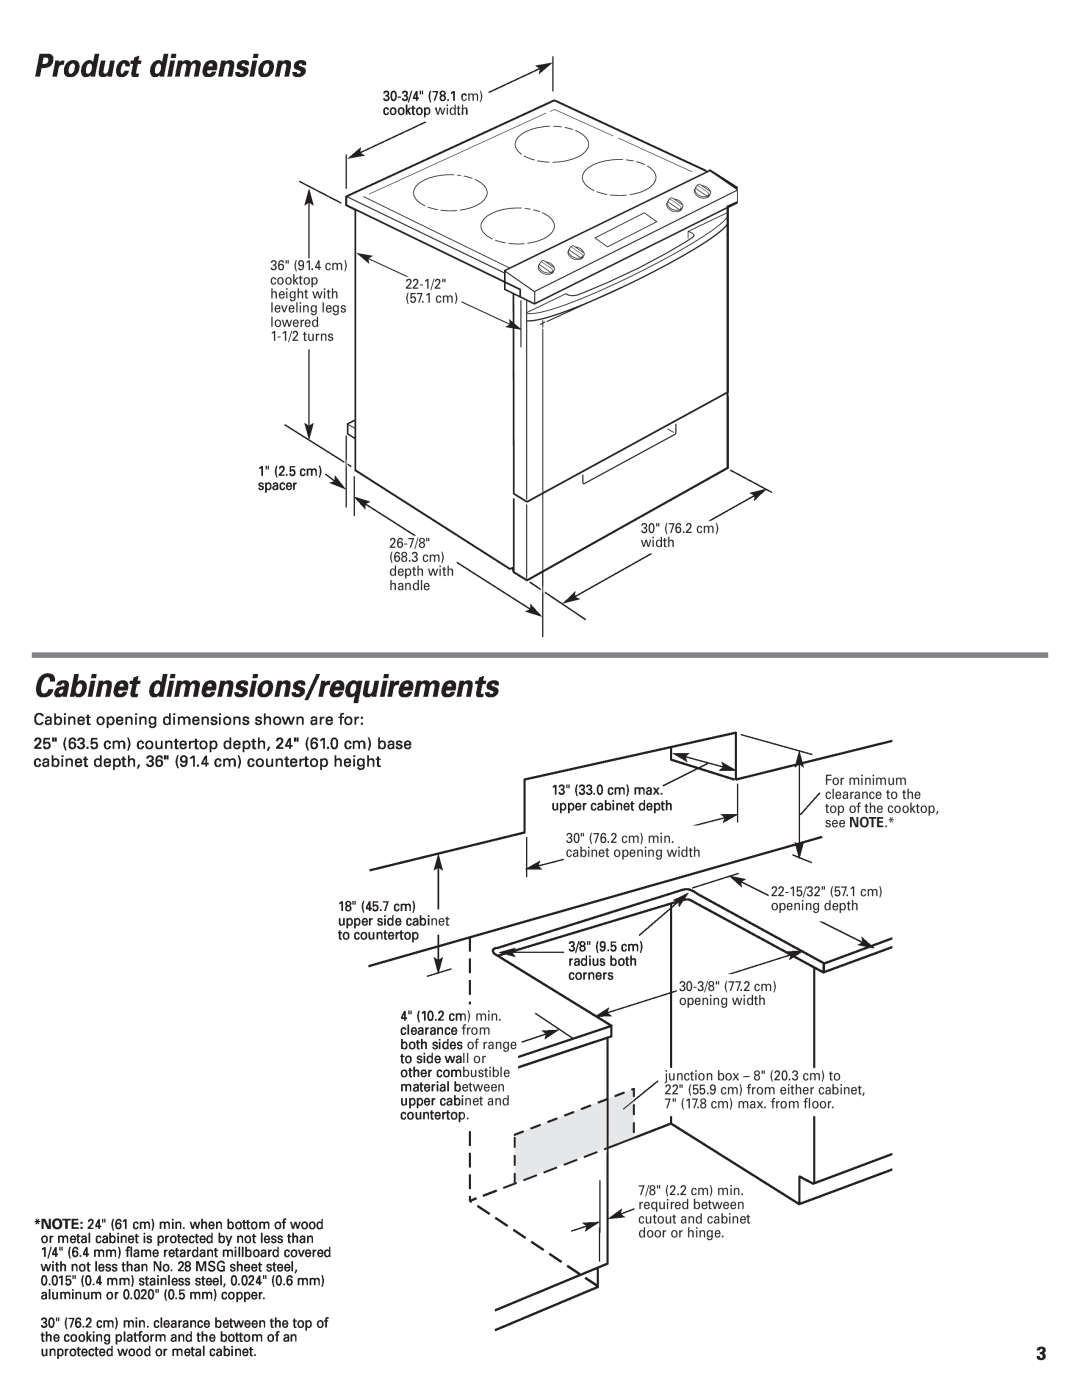 Whirlpool 9.76E+13 Product dimensions, Cabinet dimensions/requirements, Cabinet opening dimensions shown are for 